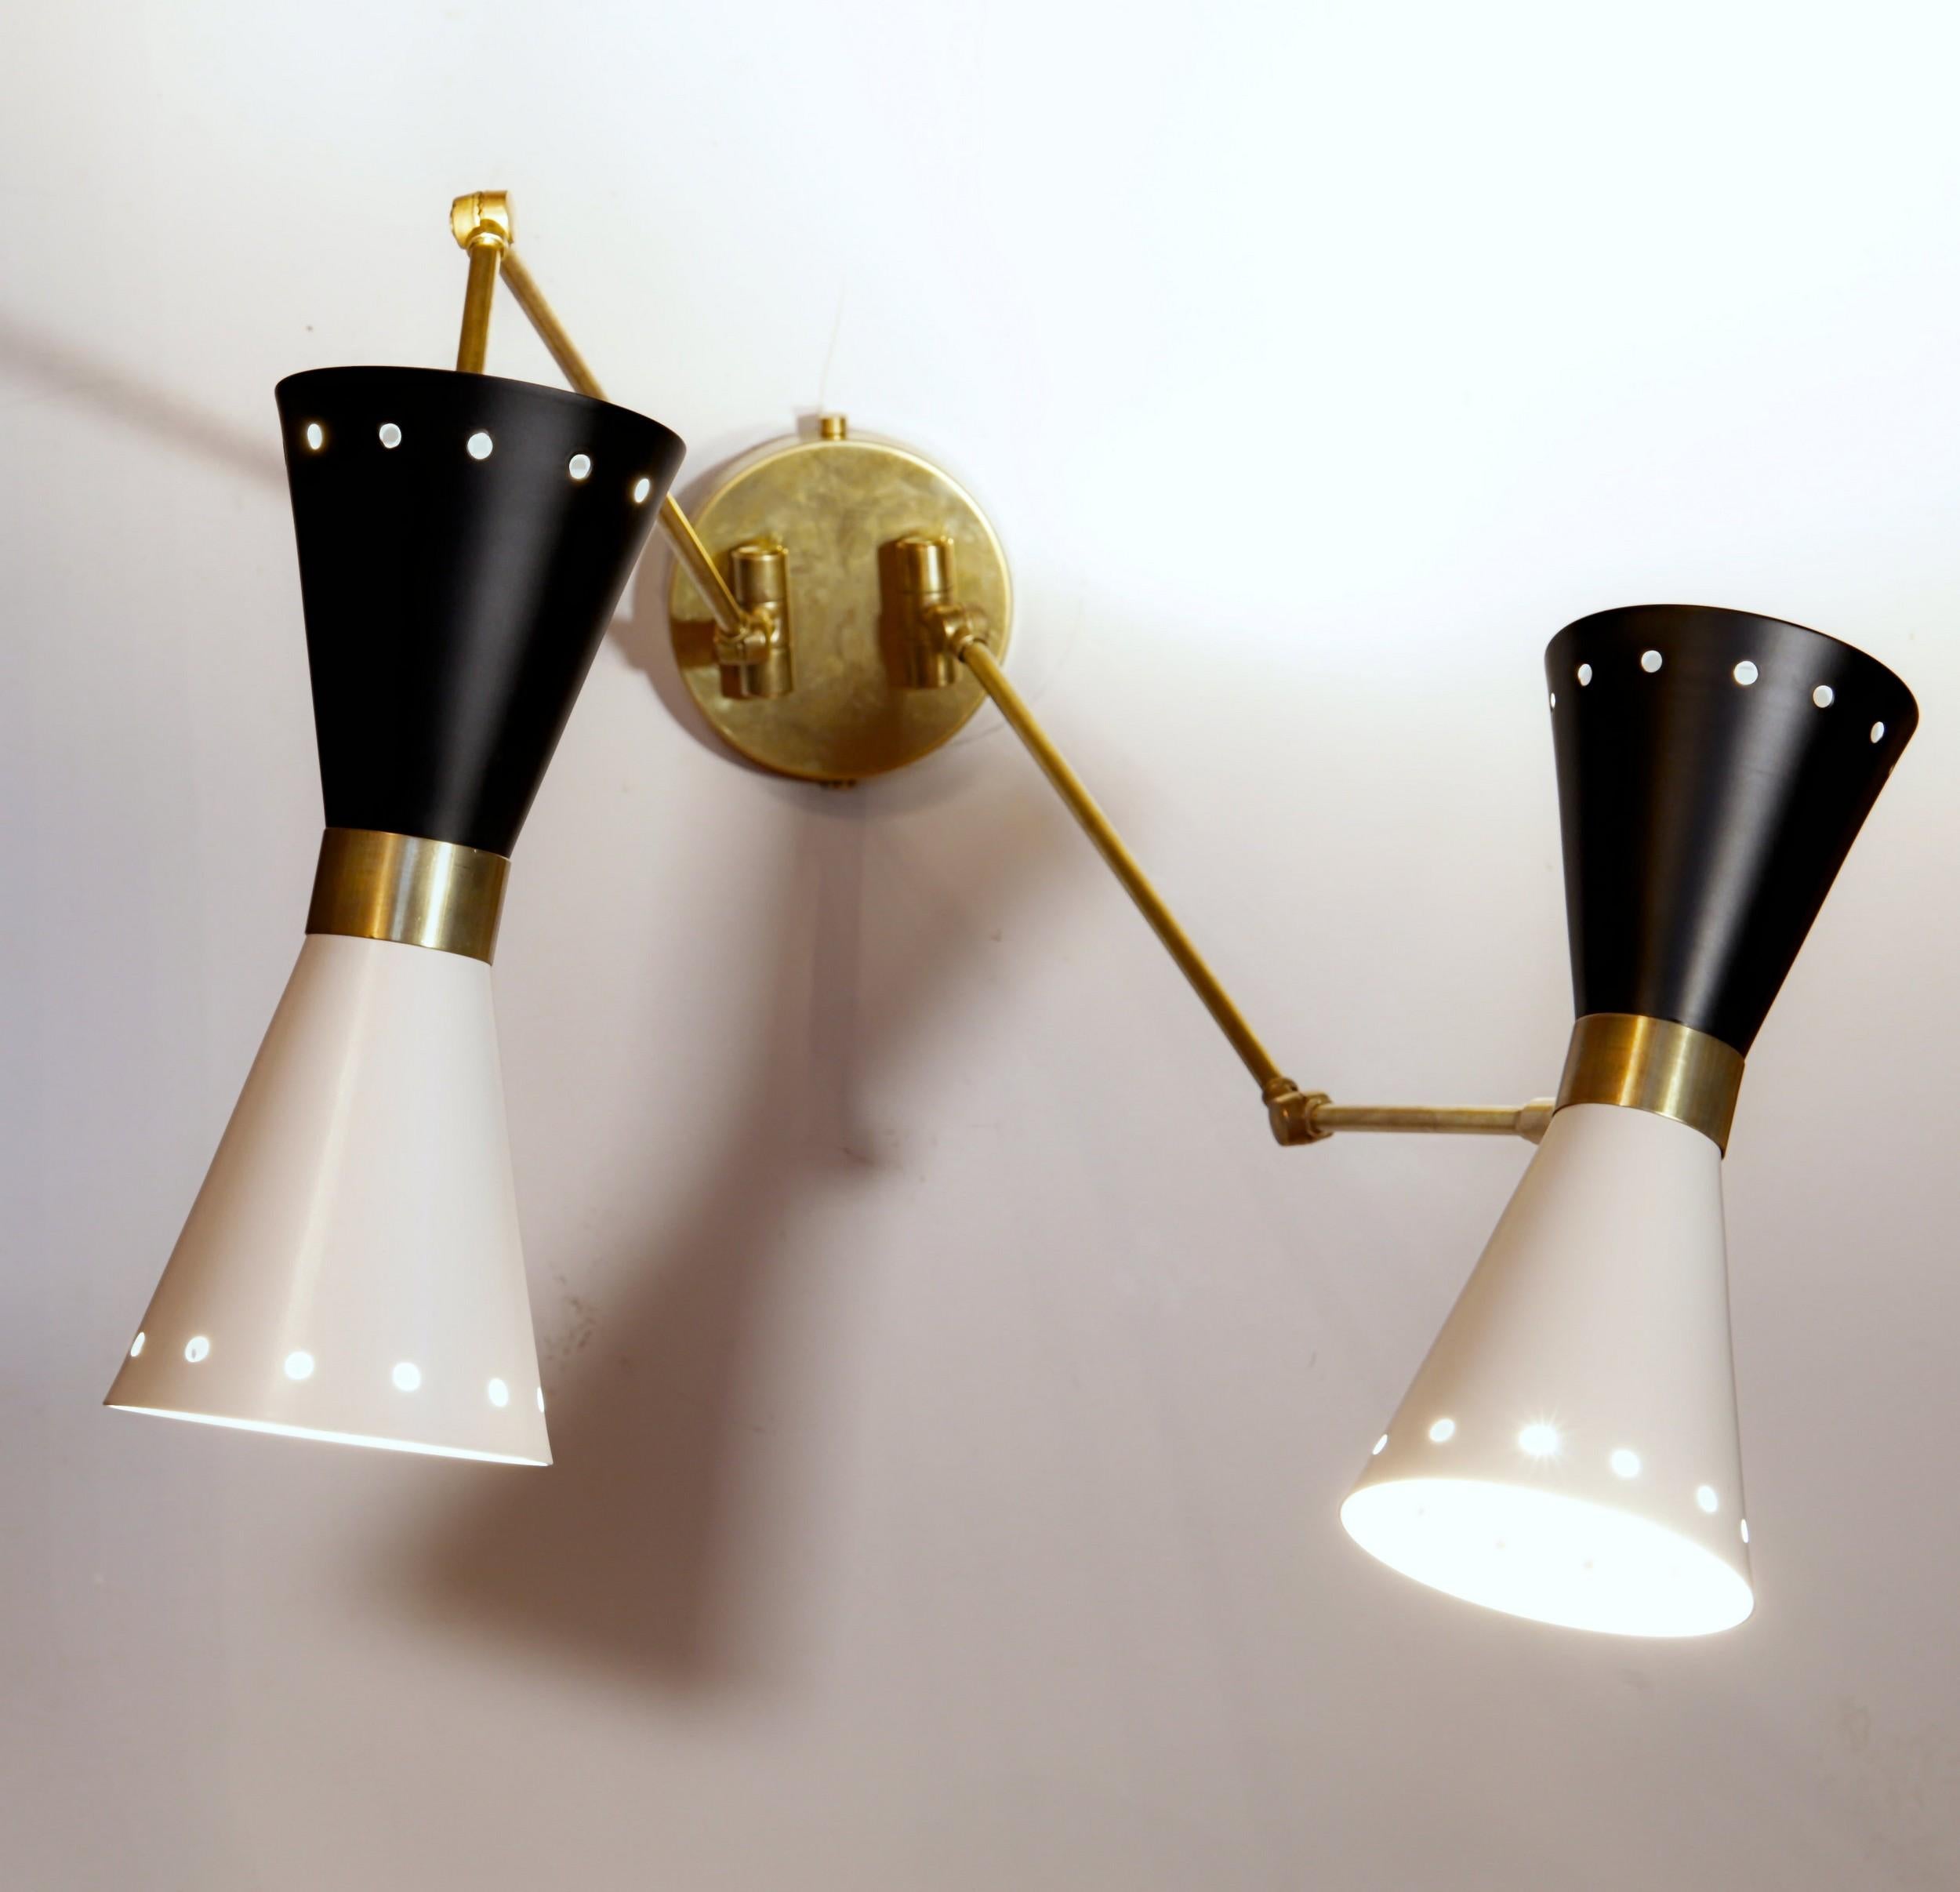 Enameled Doppio Double Articulated Sconce, Midcentury Stilnovo Style Solid Brass